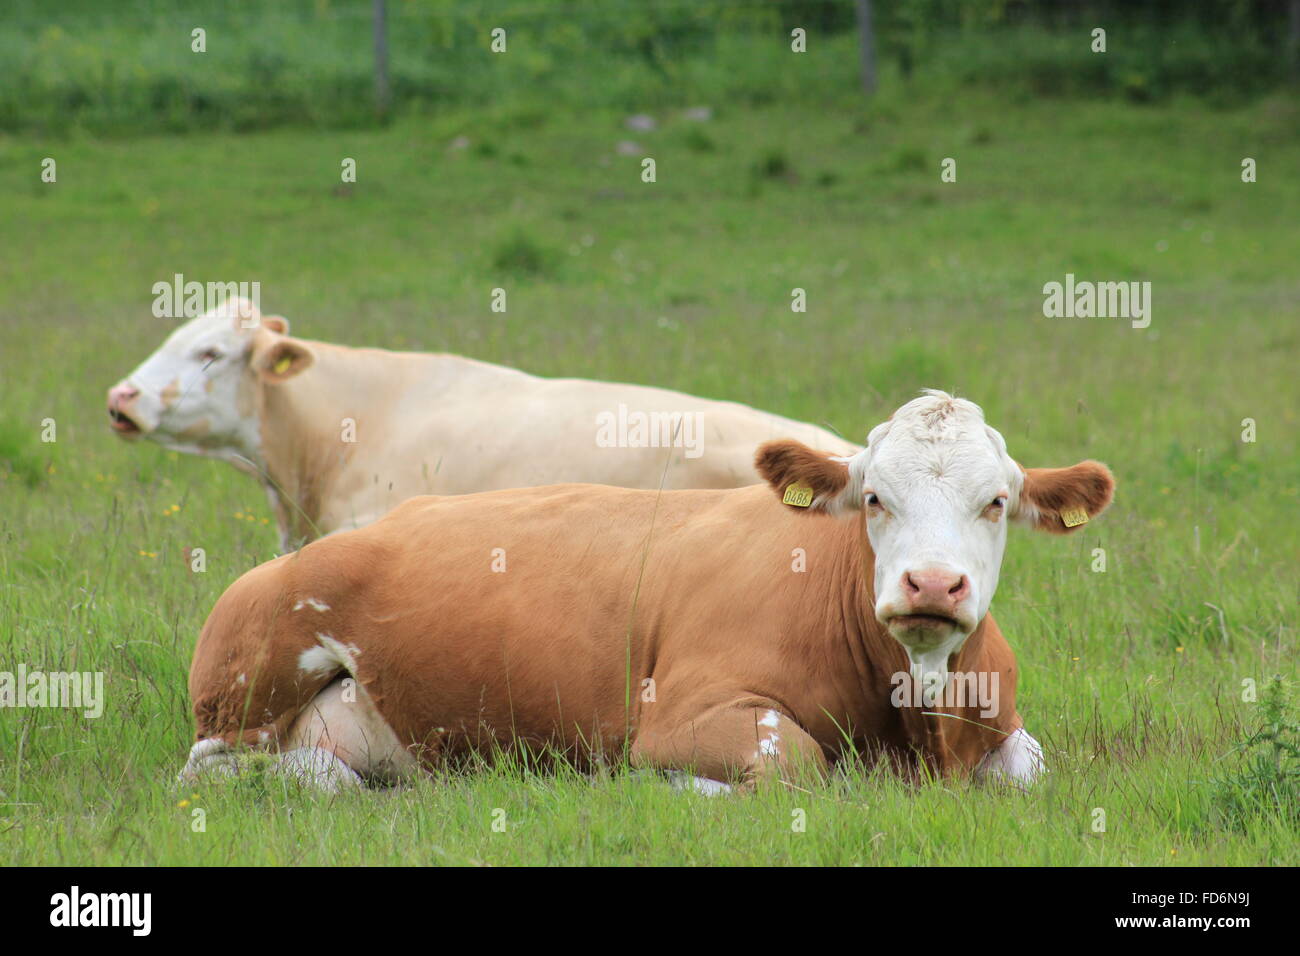 Cows Sitting In Field Stock Photo